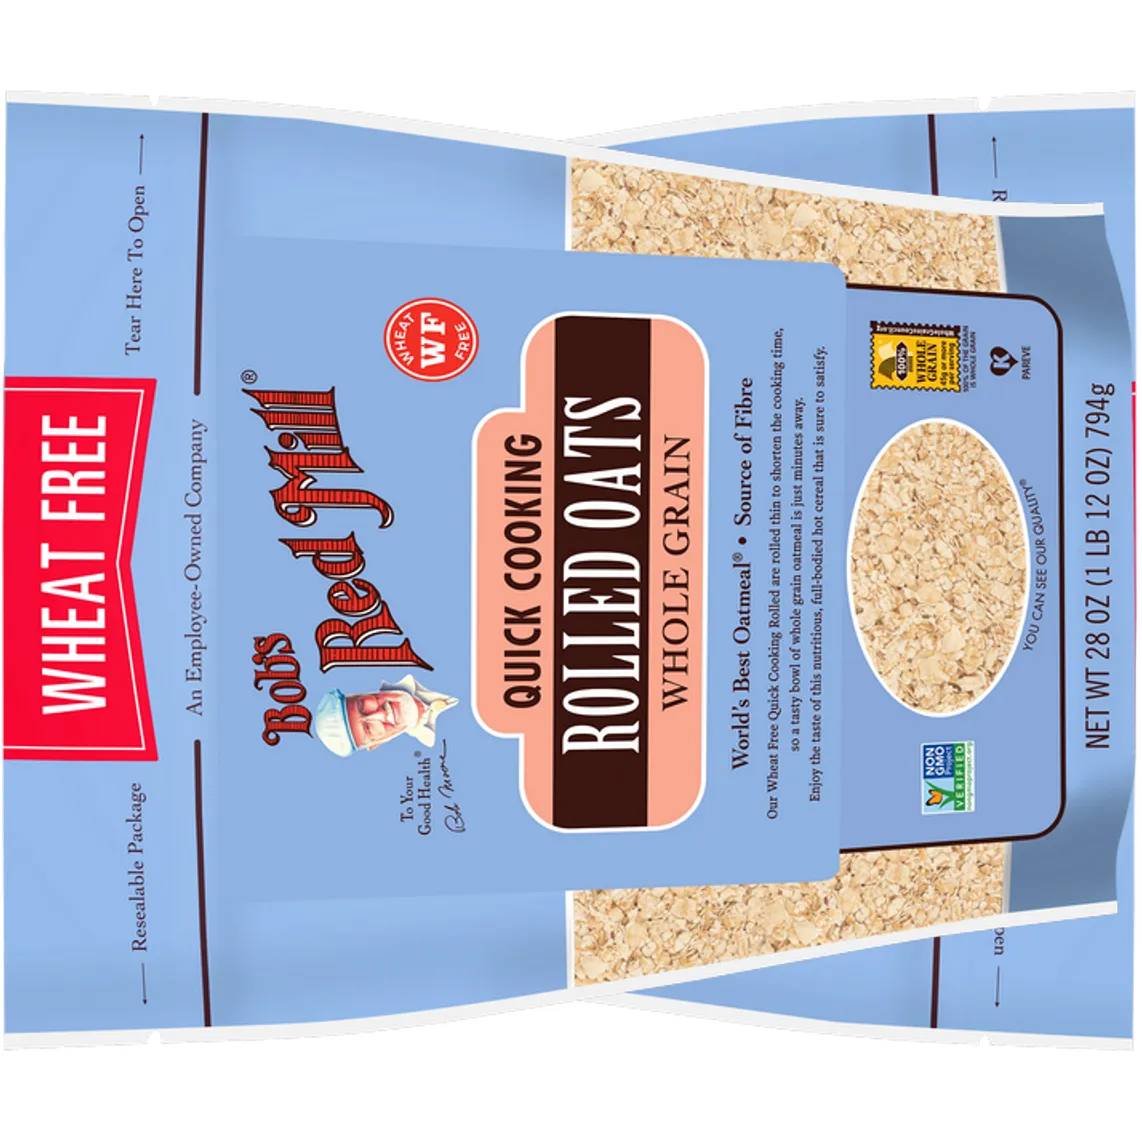 Free Old Fashioned Rolled Oats By Bob's Red Mill USA